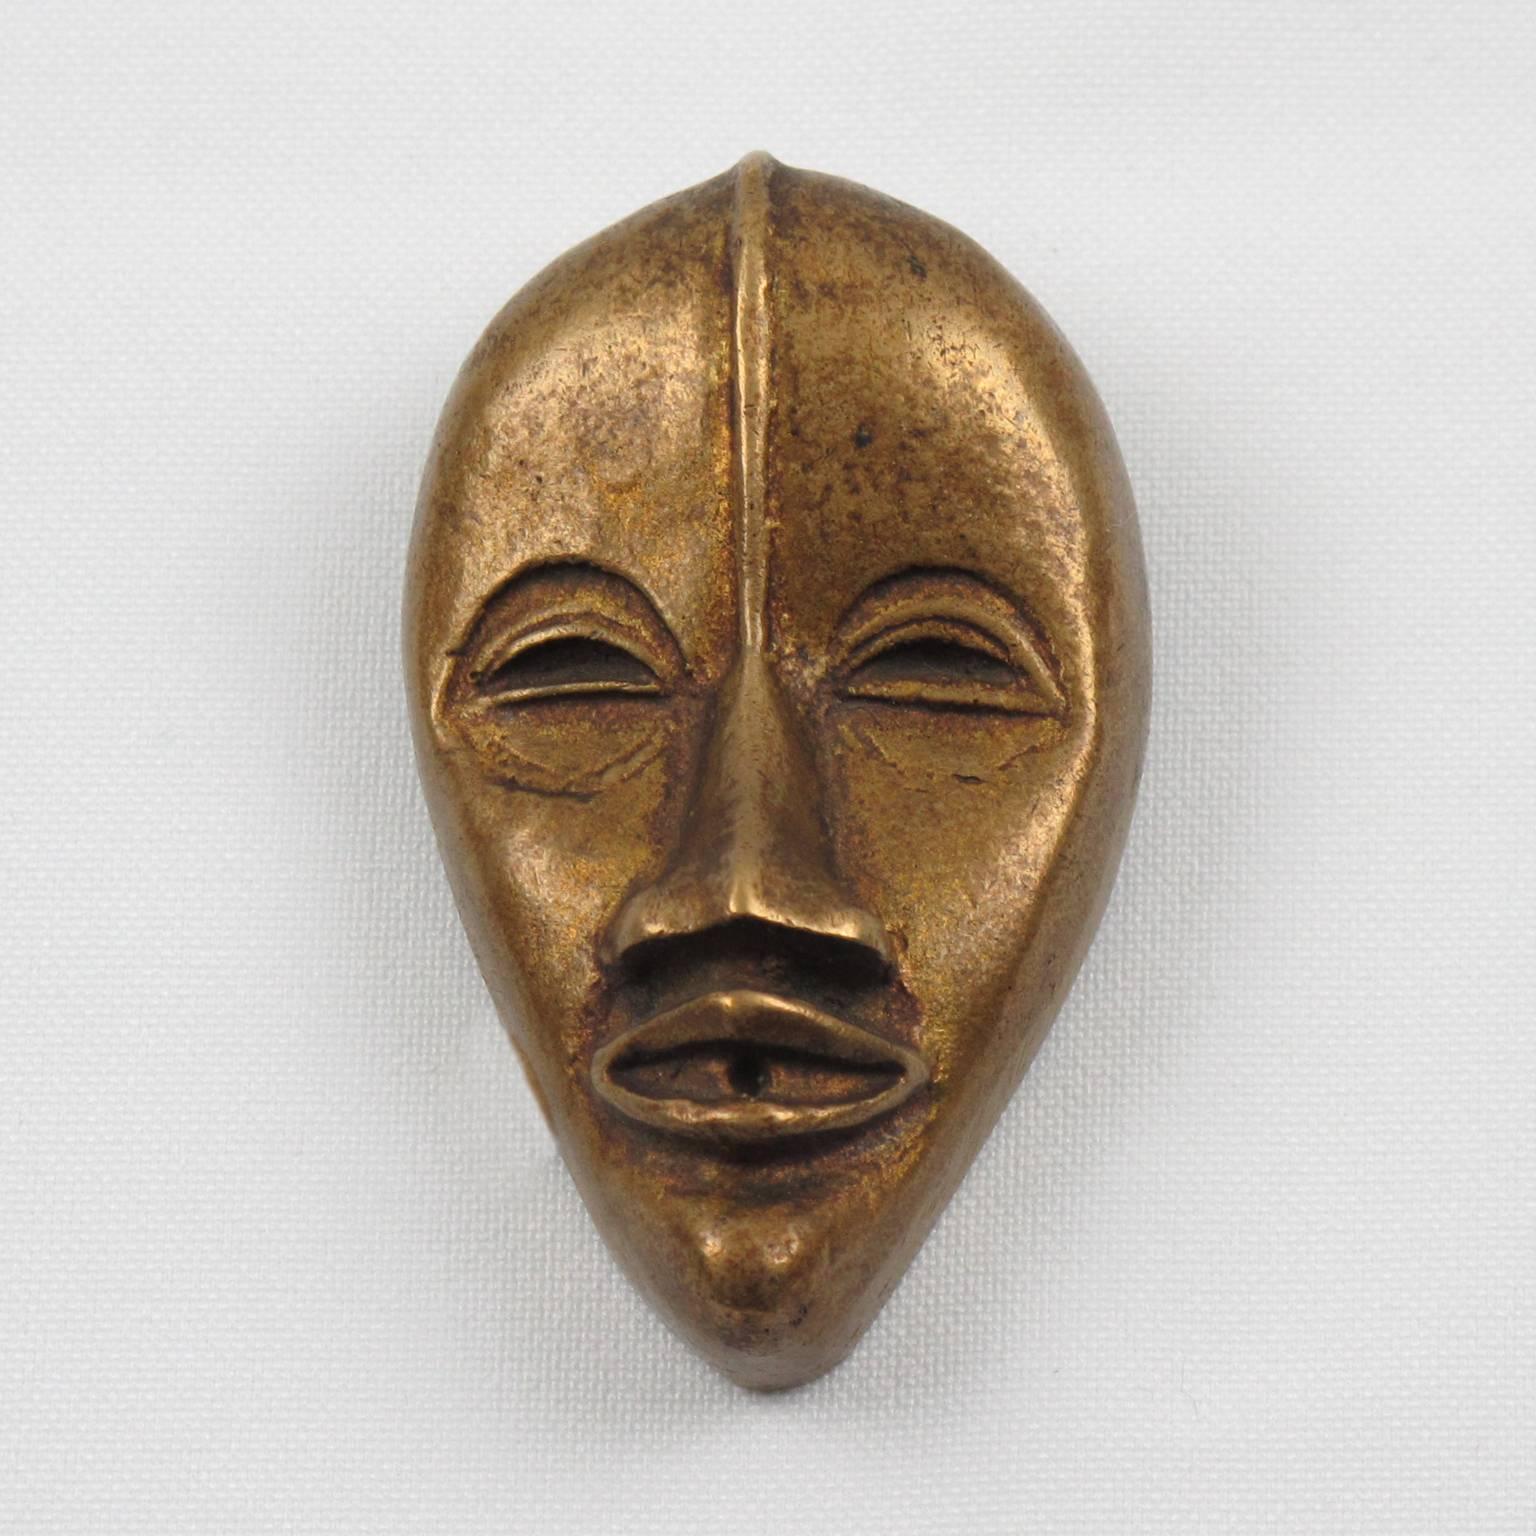 Rare vintage French Art Deco gilded bronze pin brooch dress clip. Featuring an oversized dimensional carved african mask. Folding over dress clip in excellent working condition. No visible marking. France, circa 1930s.

Measurements: 2.50 in. high